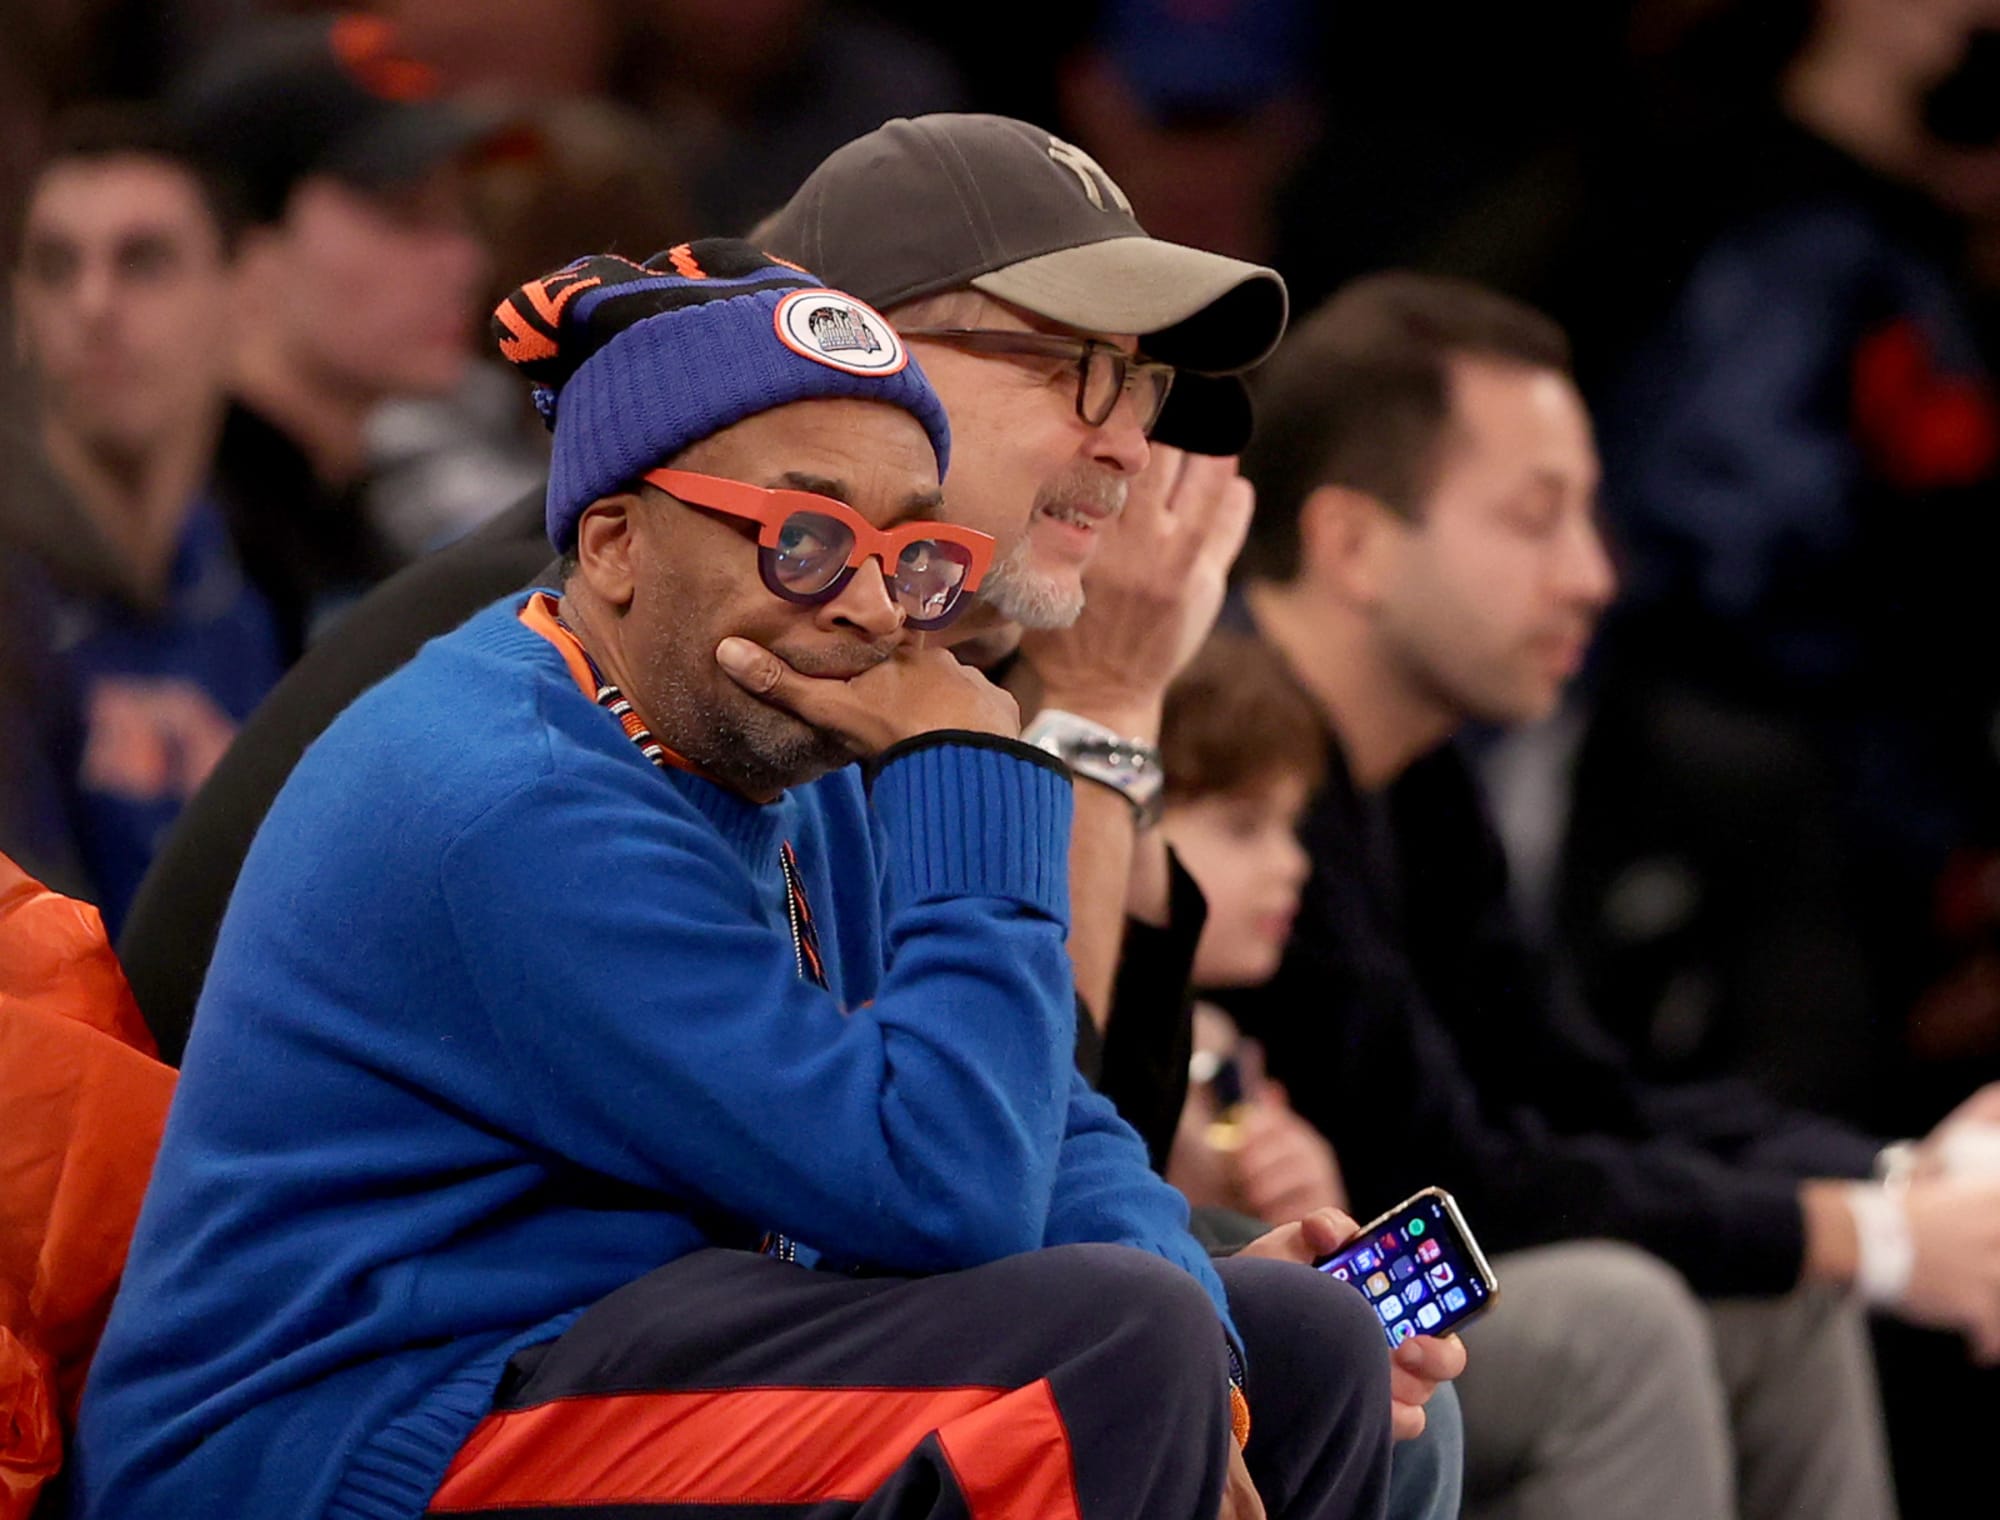 Spike Lee riles up controversy after cheering for Knicks' rival in playoffs